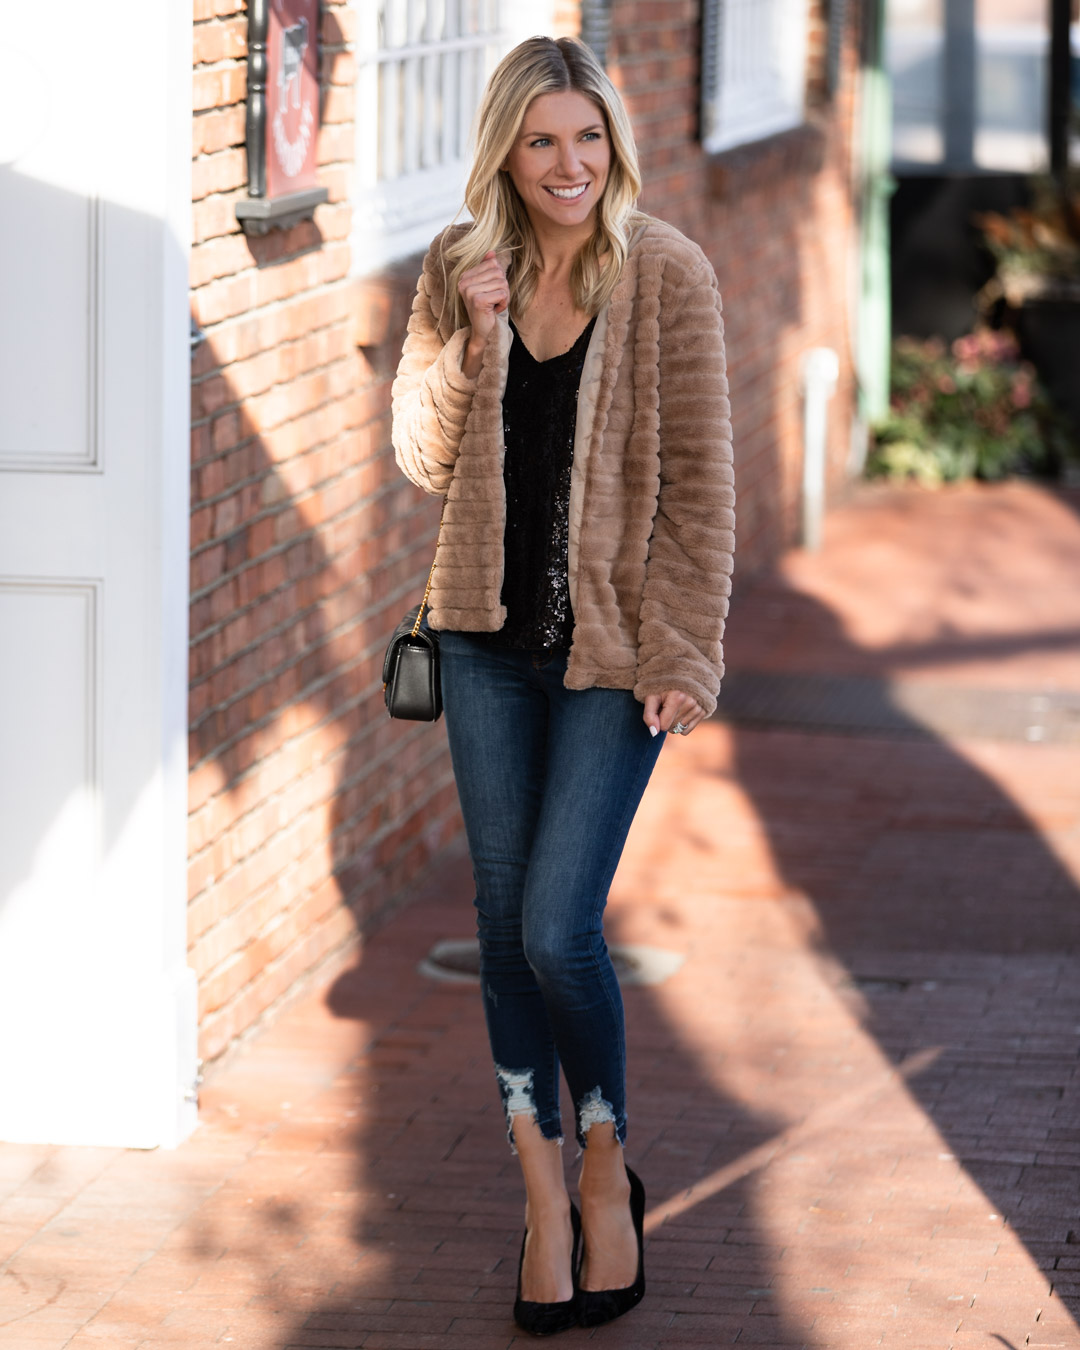 Sequin Tank and Faux Fur Jacket